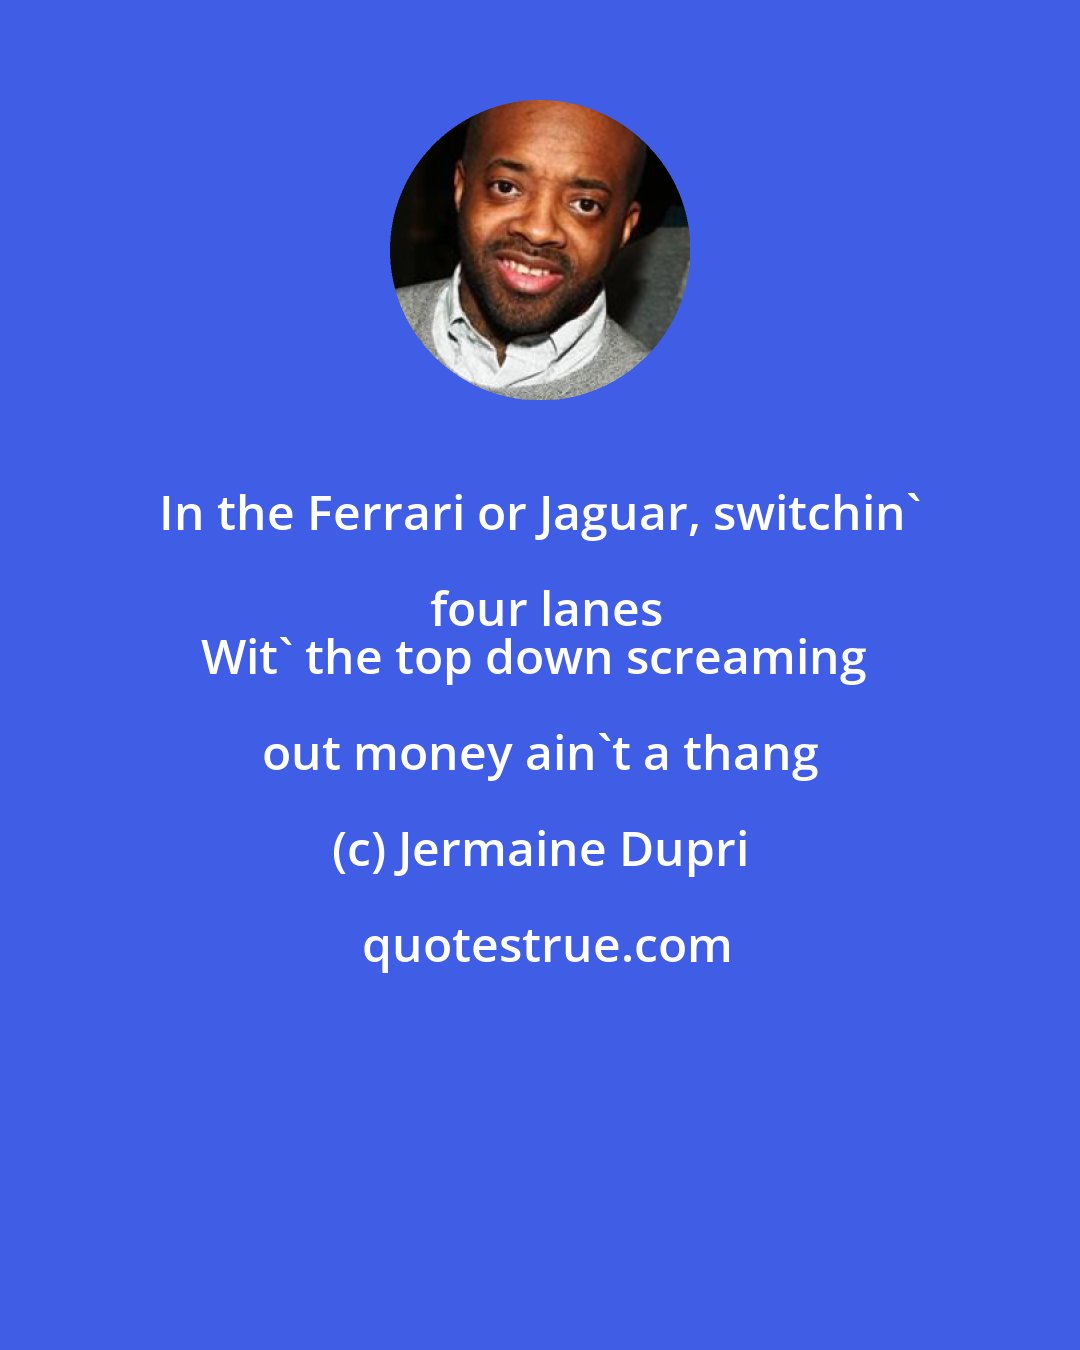 Jermaine Dupri: In the Ferrari or Jaguar, switchin' four lanes
Wit' the top down screaming out money ain't a thang